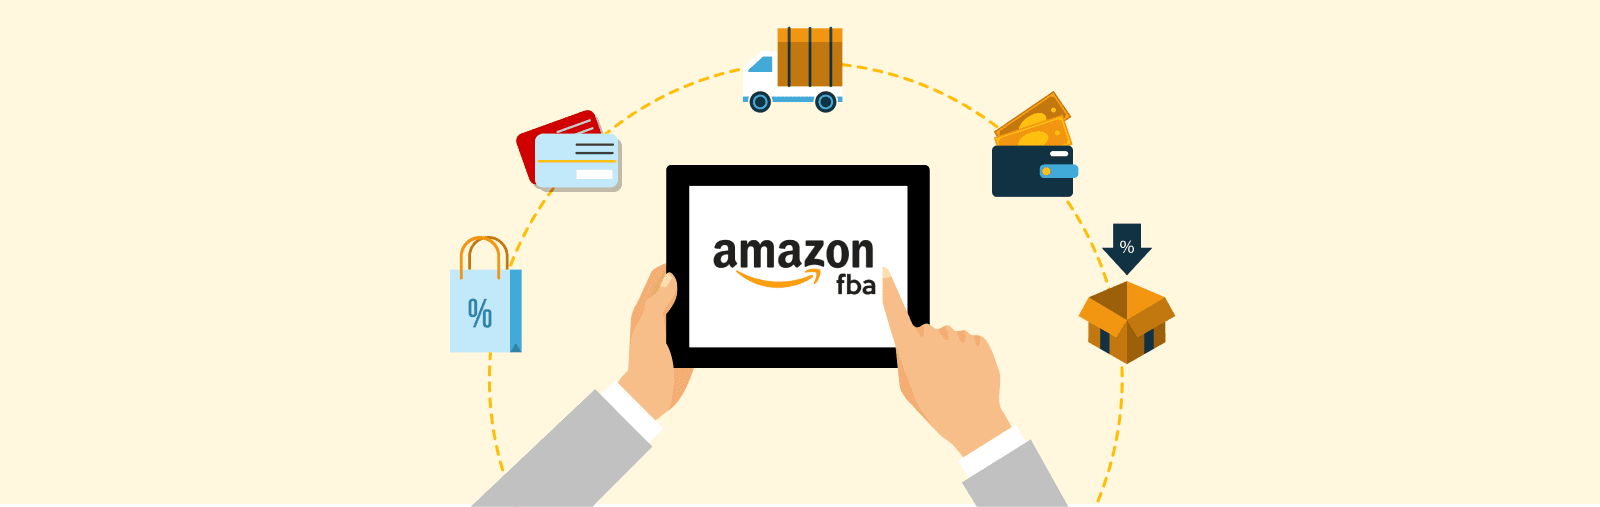 How to Streamline Order Fulfillment with Amazon and e-conomic